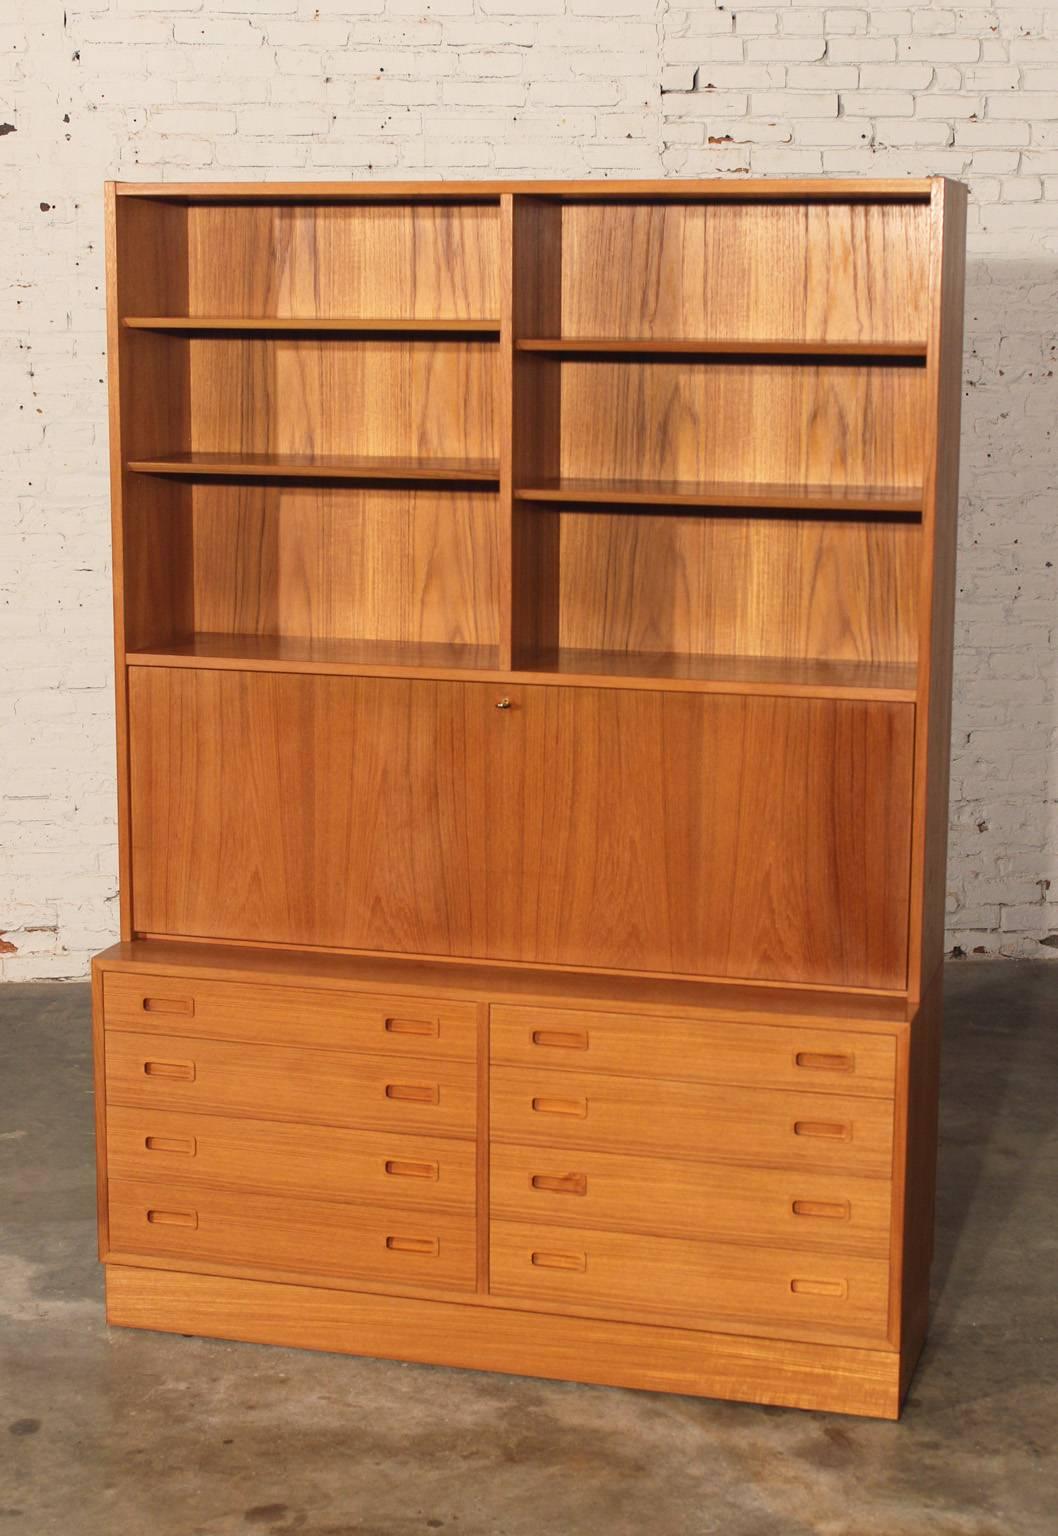 Wonderful Poul Hundevad secretary bookcase desk. This one is all teak and in wonderful vintage condition.

This gorgeous secretary was designed by one of the premier Danish Mid-Century designers, Poul Hundevad. As many of the mid-century designers